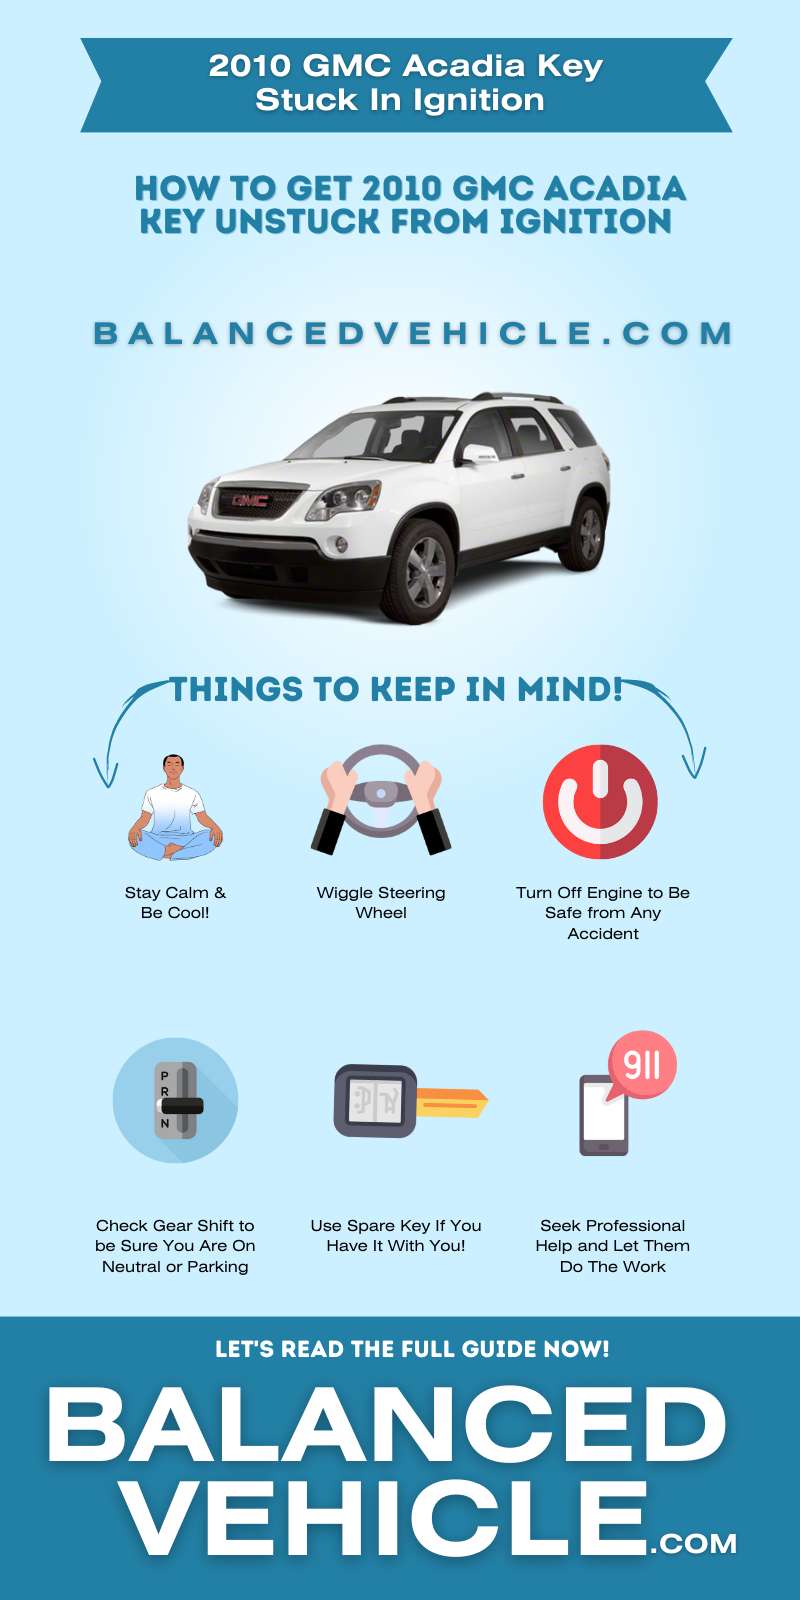 2010 GMC Acadia Key Stuck In Ignition Infographic Guided By BalancedVehicle.com